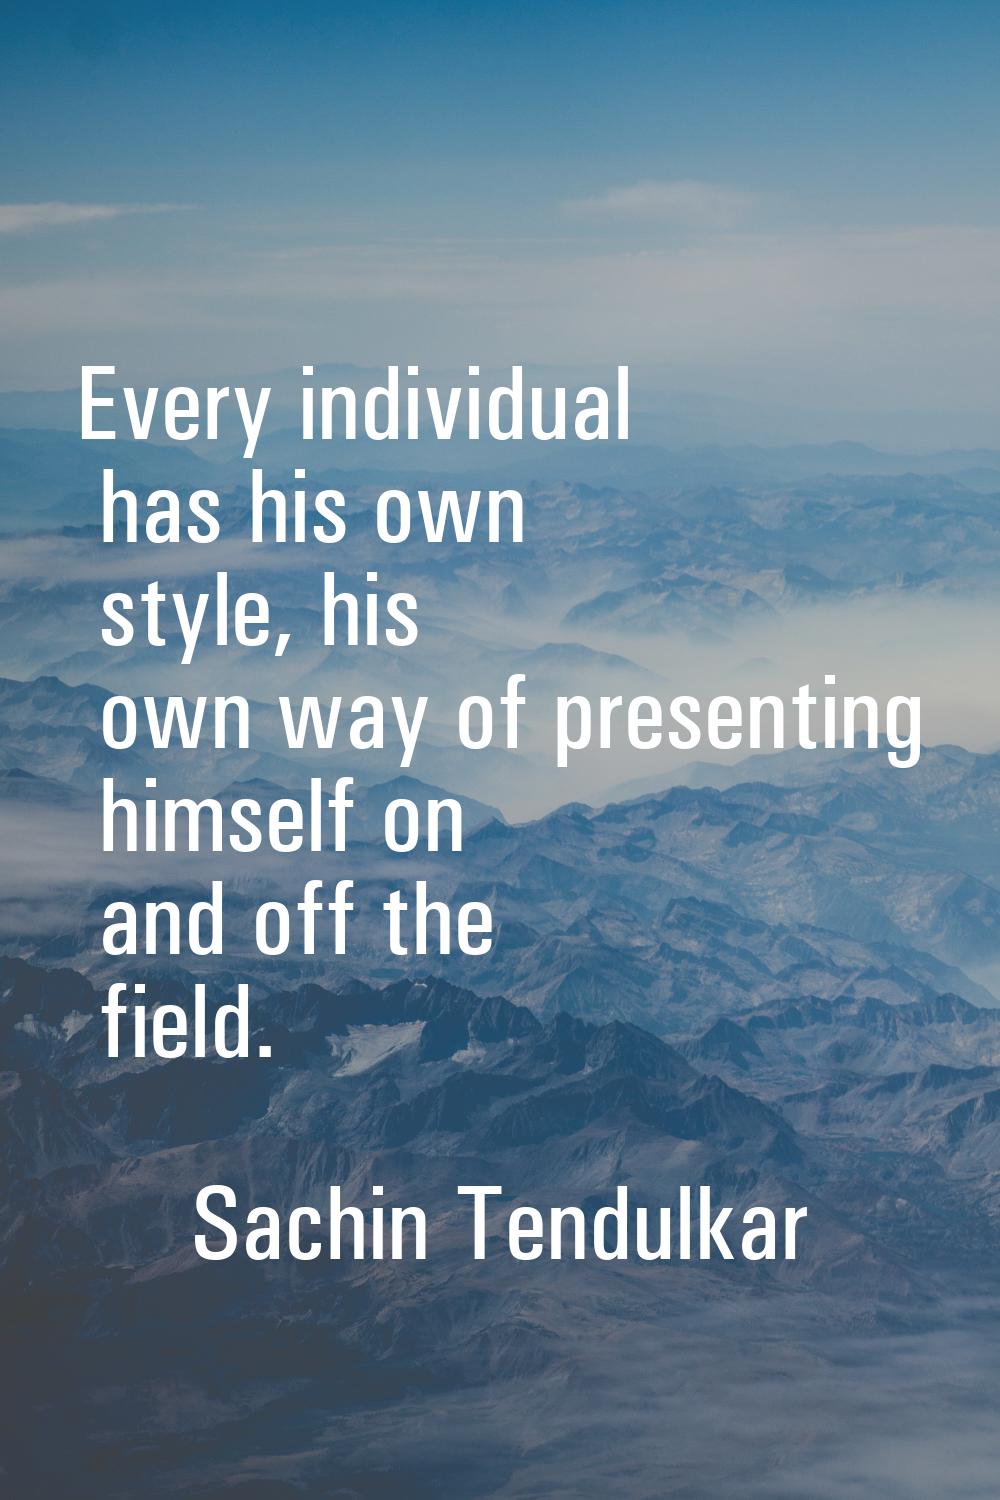 Every individual has his own style, his own way of presenting himself on and off the field.